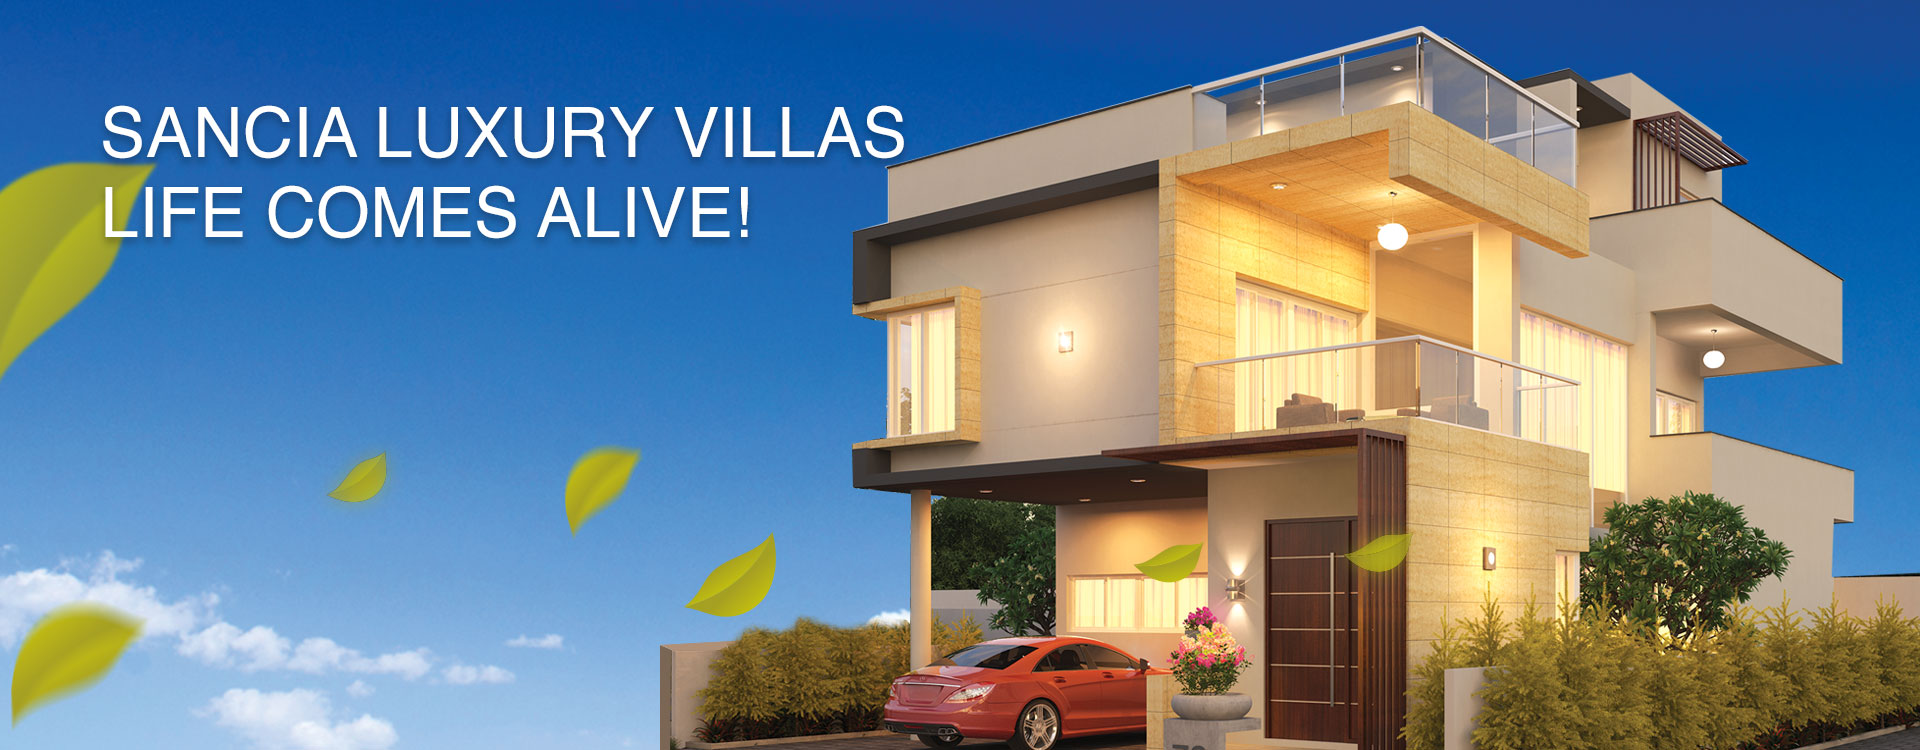 Radhey Sancia offers uncompromising choice in living with flawless space and luxury